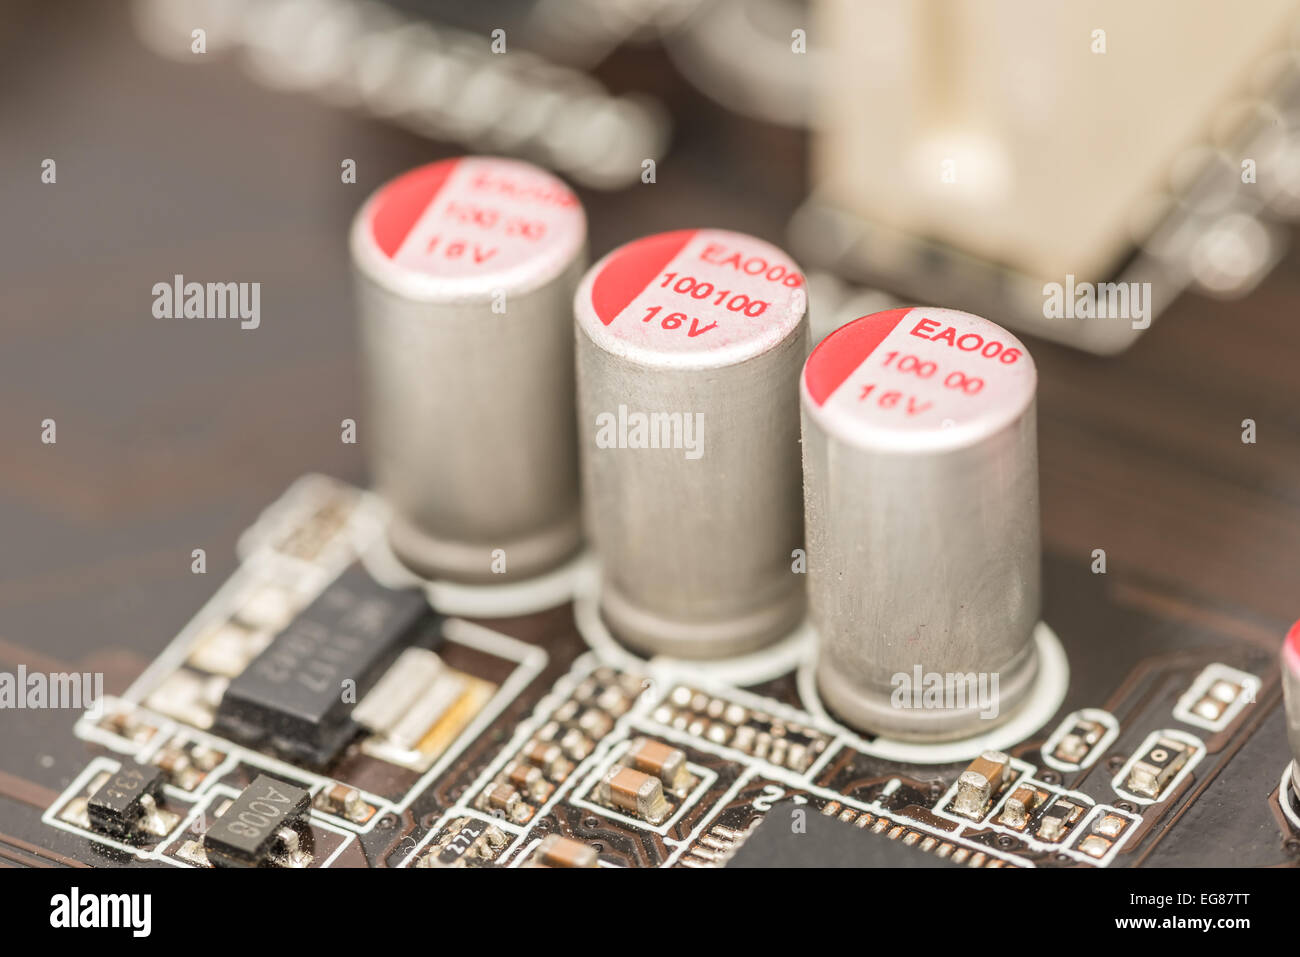 Computer Chip Capacitors And Resistors On Motherboard Stock Photo